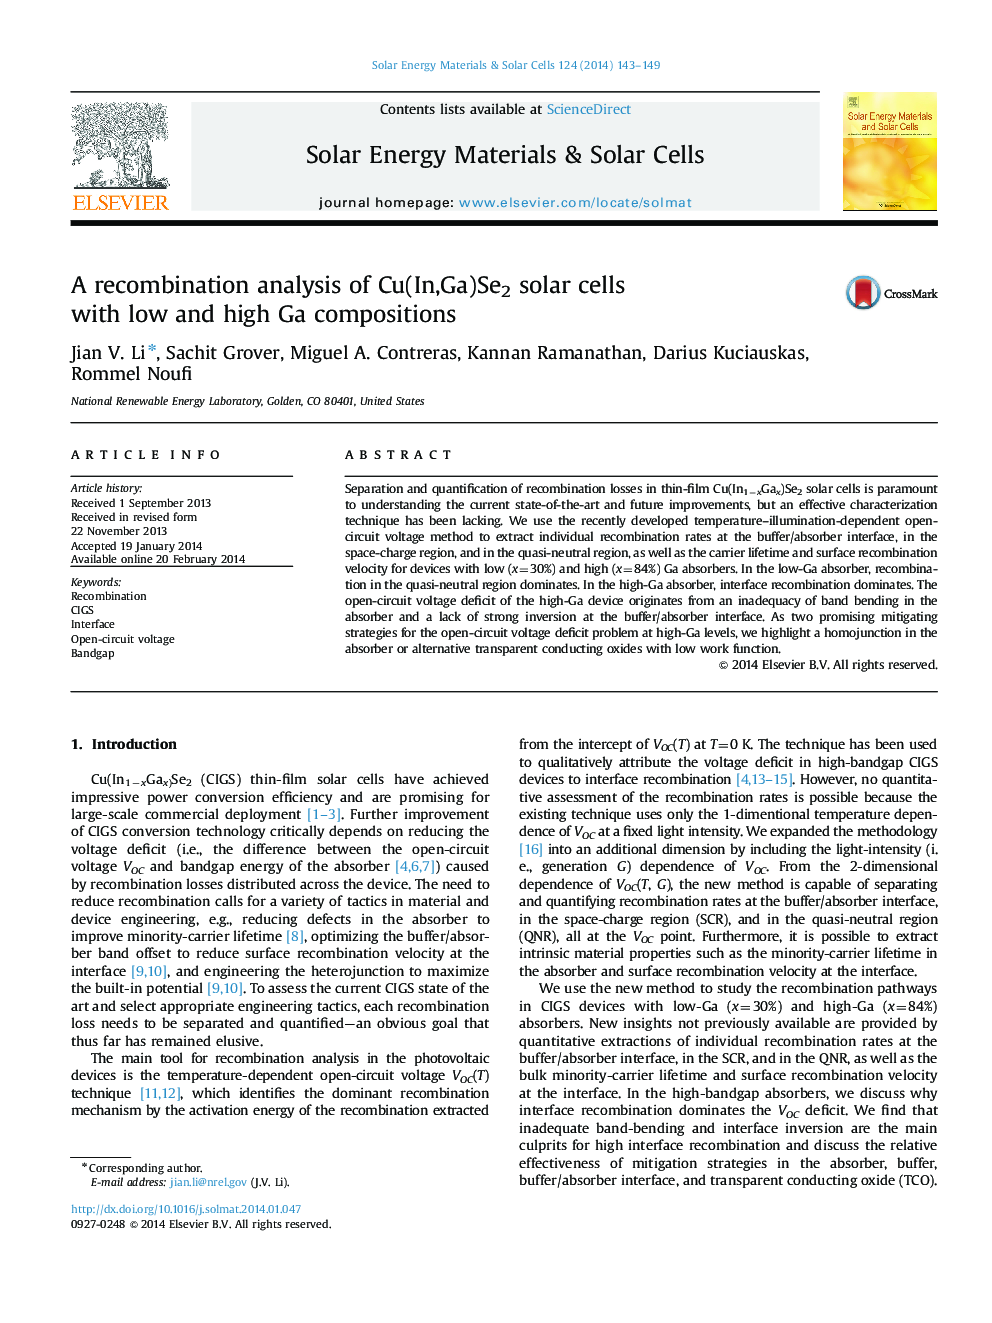 A recombination analysis of Cu(In,Ga)Se2 solar cells with low and high Ga compositions